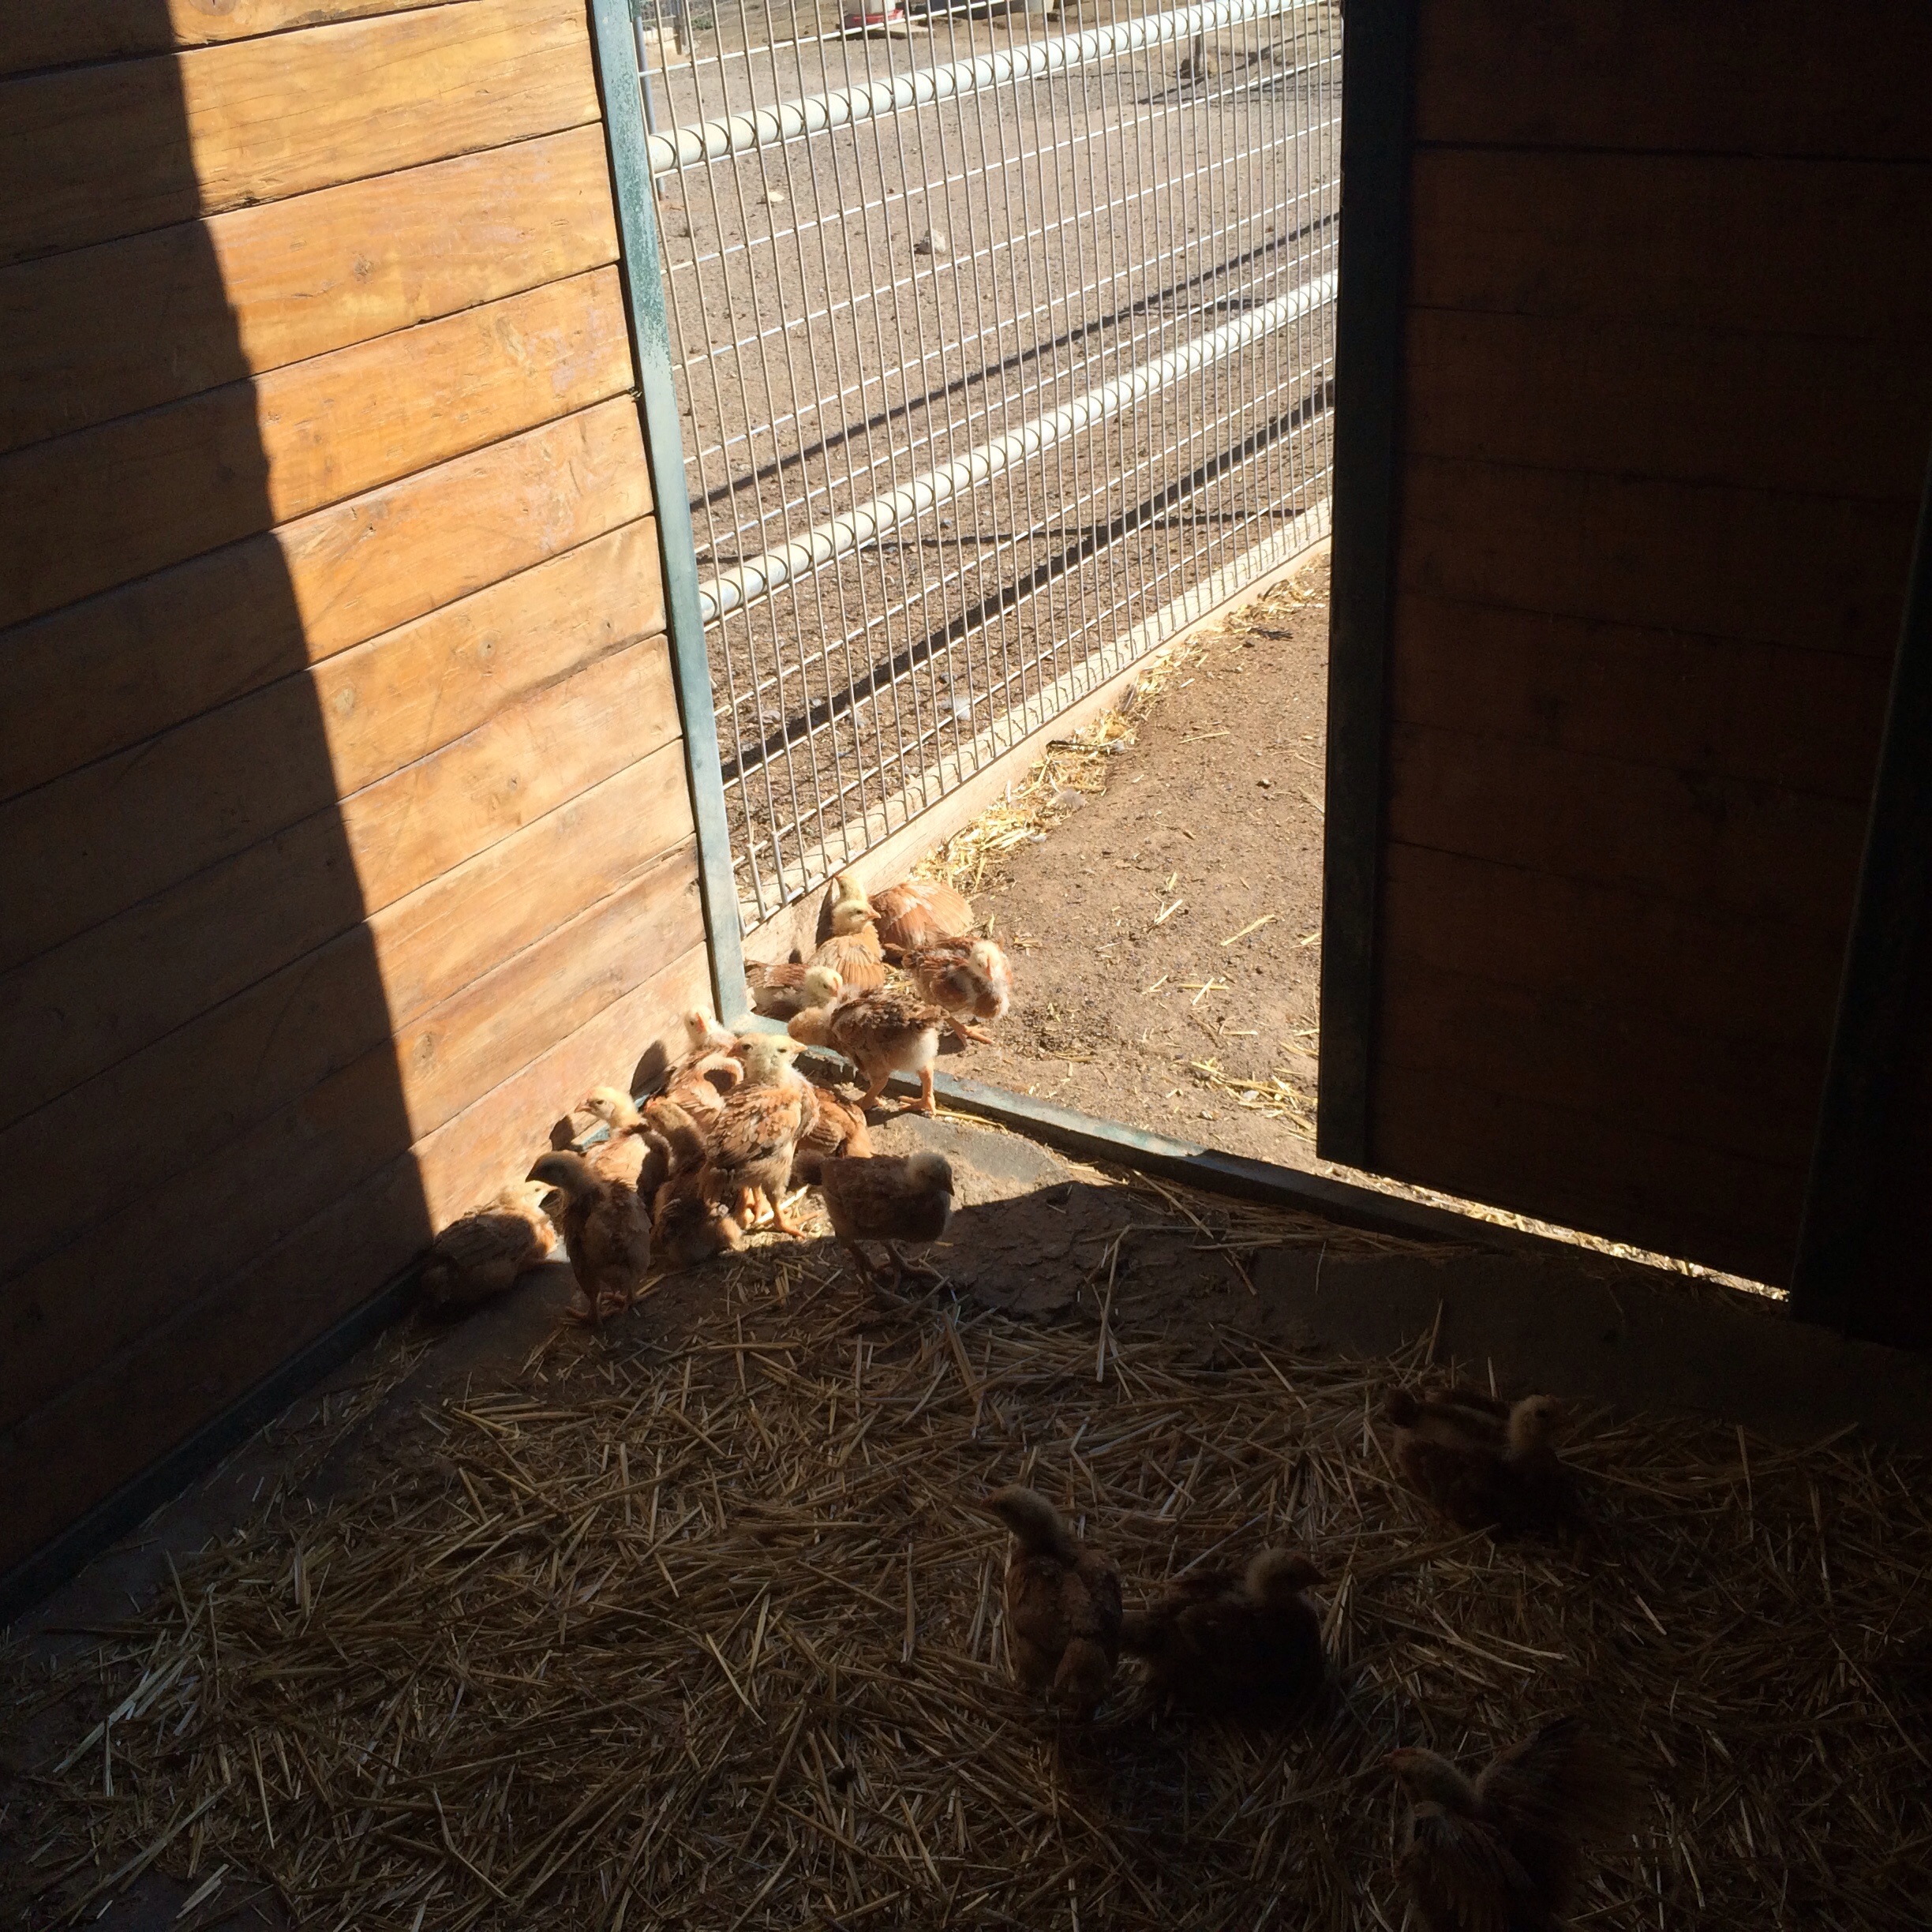 They are enjoying to sunshine and our animals get full freedom not just a fake door in a over crowded barn so they can say they have access to the sun so they qualify to be organic